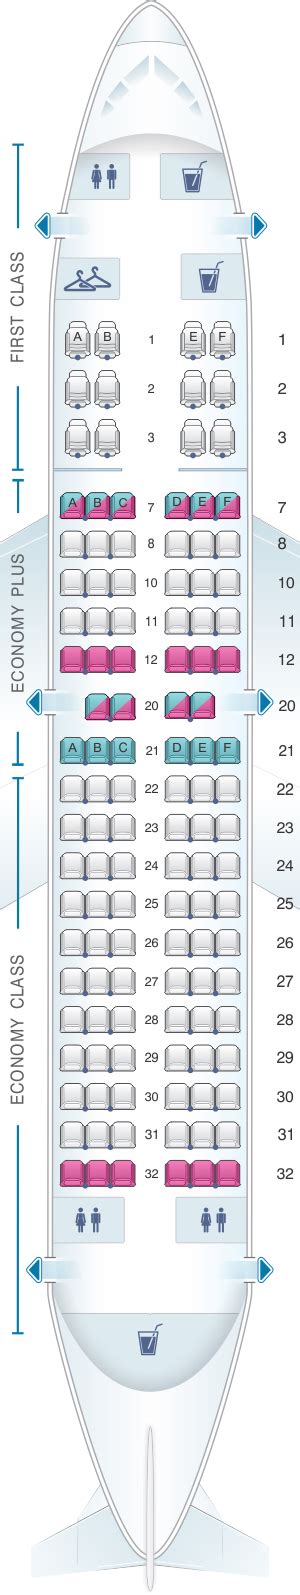 United 737 700 seat map. Seat 39 J is a standard Economy Class seat that has extra legroom but may also have limited or no recline due to the exit. Seat 40 A is a standard Economy Class seat that has extra legroom due to the missing seat in front. Seat 40 B is a standard Economy Class seat. Seat 40 C is a standard Economy Class seat. 